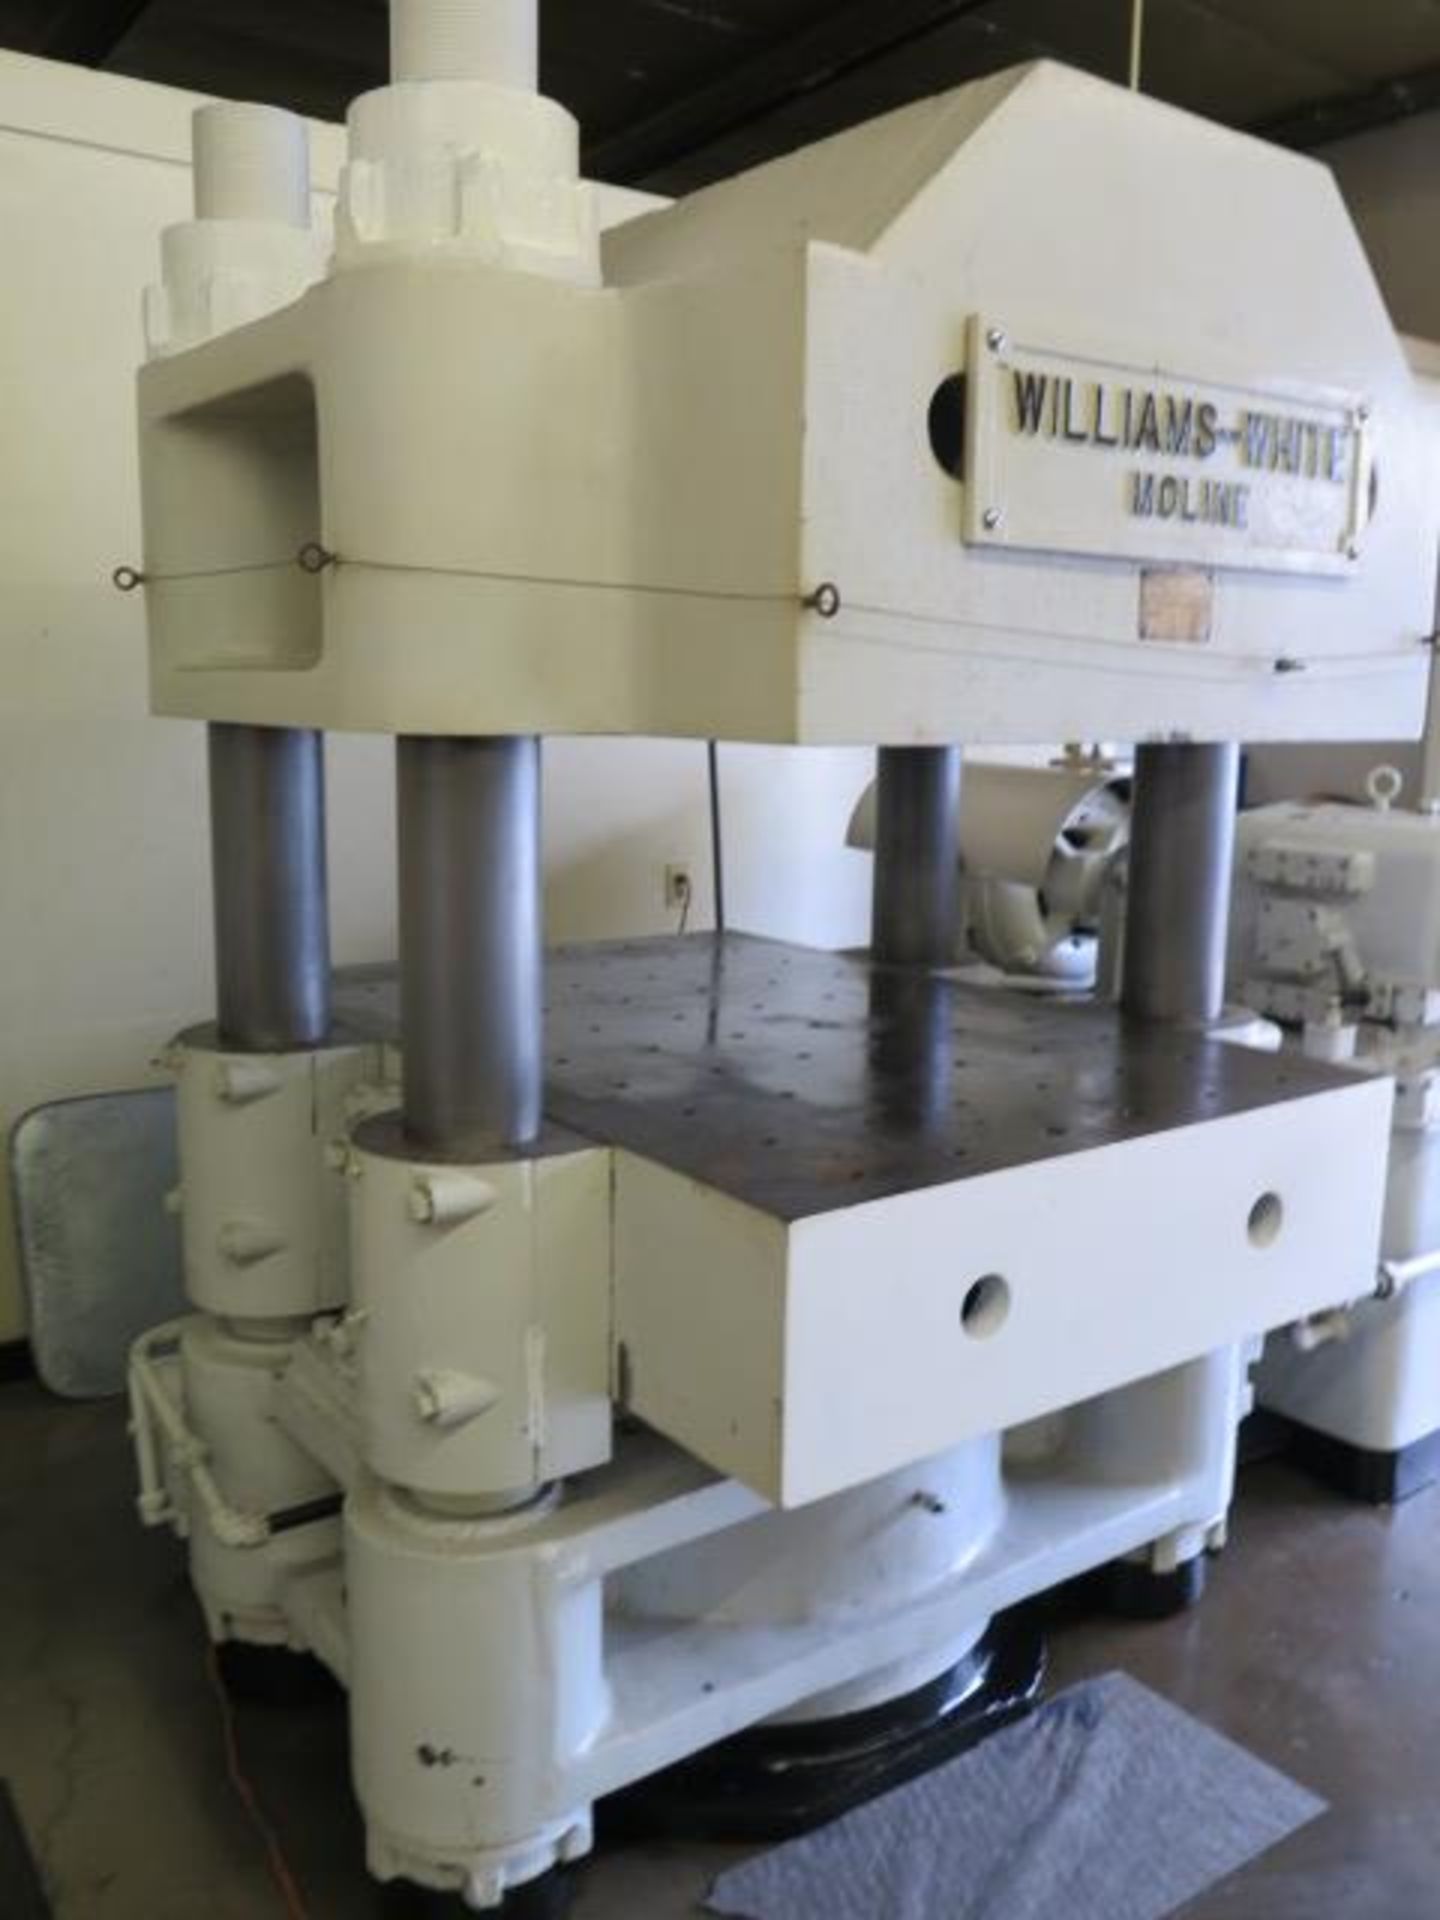 Williams-White 600 Ton Hydraulic 4-Post Press s/n C-1663 w/ 42” x 60” Platens SOLD AS-IS - Image 4 of 12